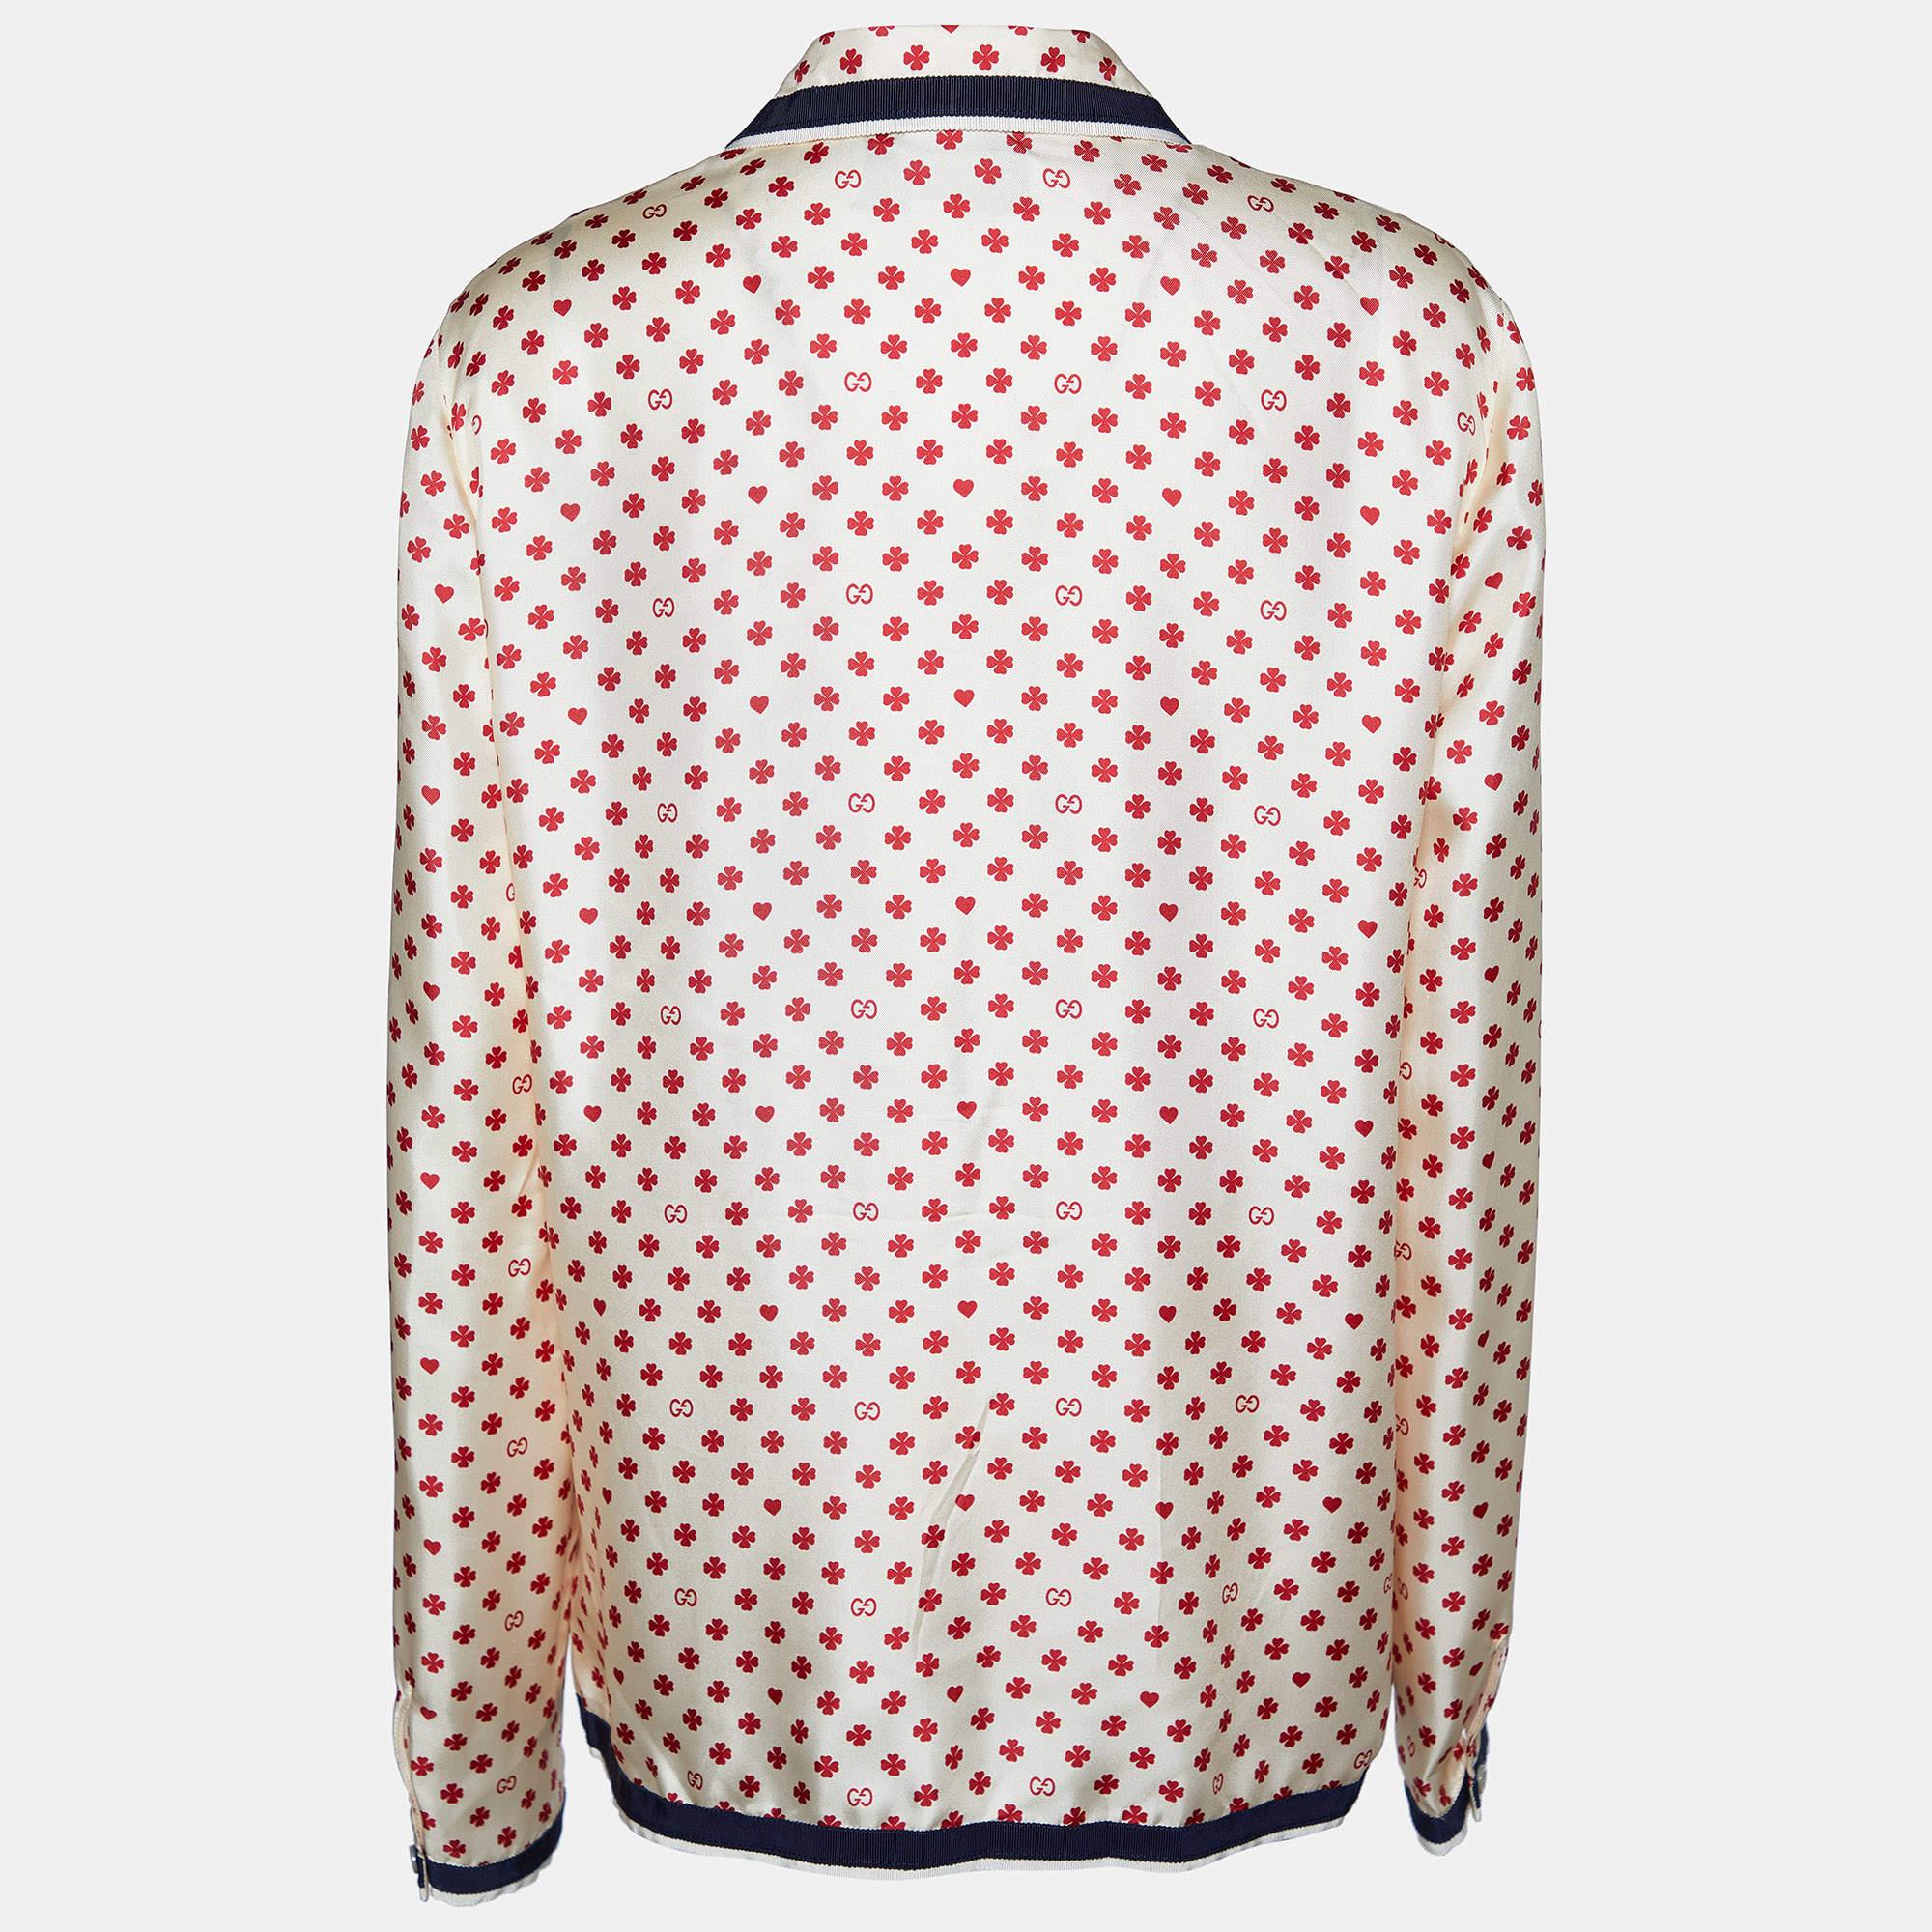 The Gucci shirt is a stylish and luxurious wardrobe addition. Made from premium silk, it features charming hearts and clover print, while the button front adds a classic touch. Perfect for adding a touch of sophistication to any ensemble.

